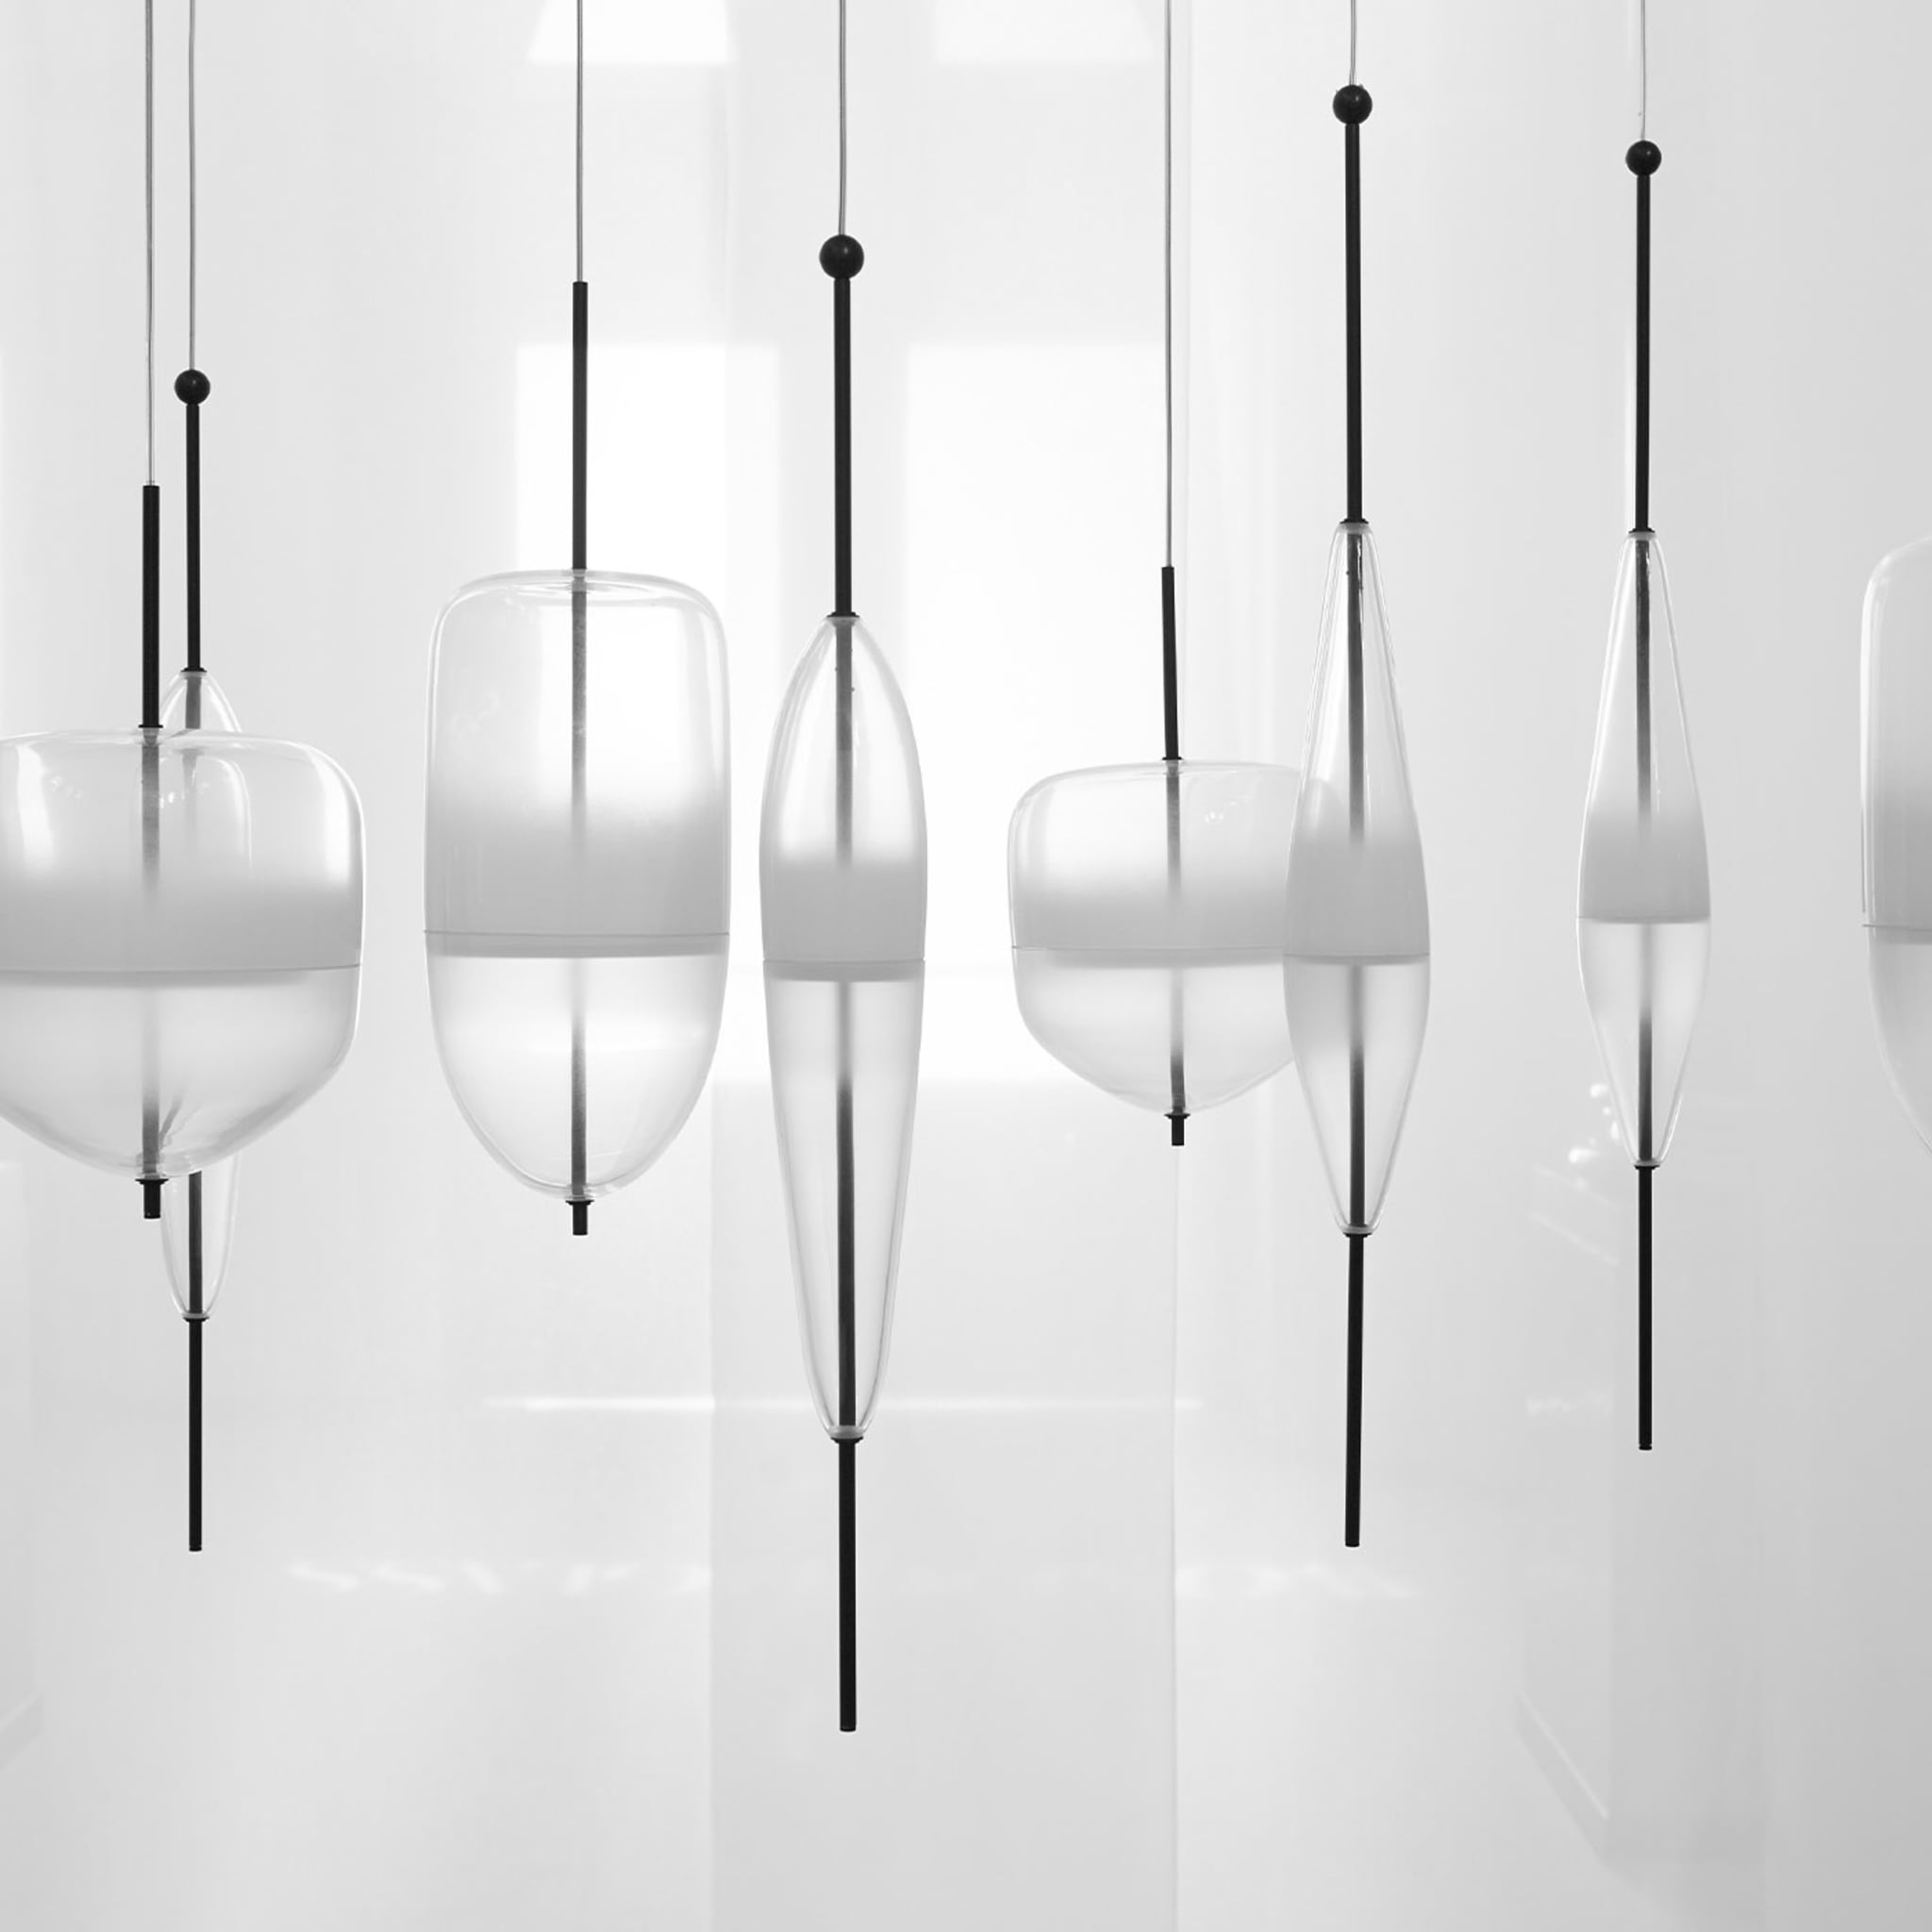 Flow[T] S1 Off White Pendant Lamp by Nao Tamura - Alternative view 1